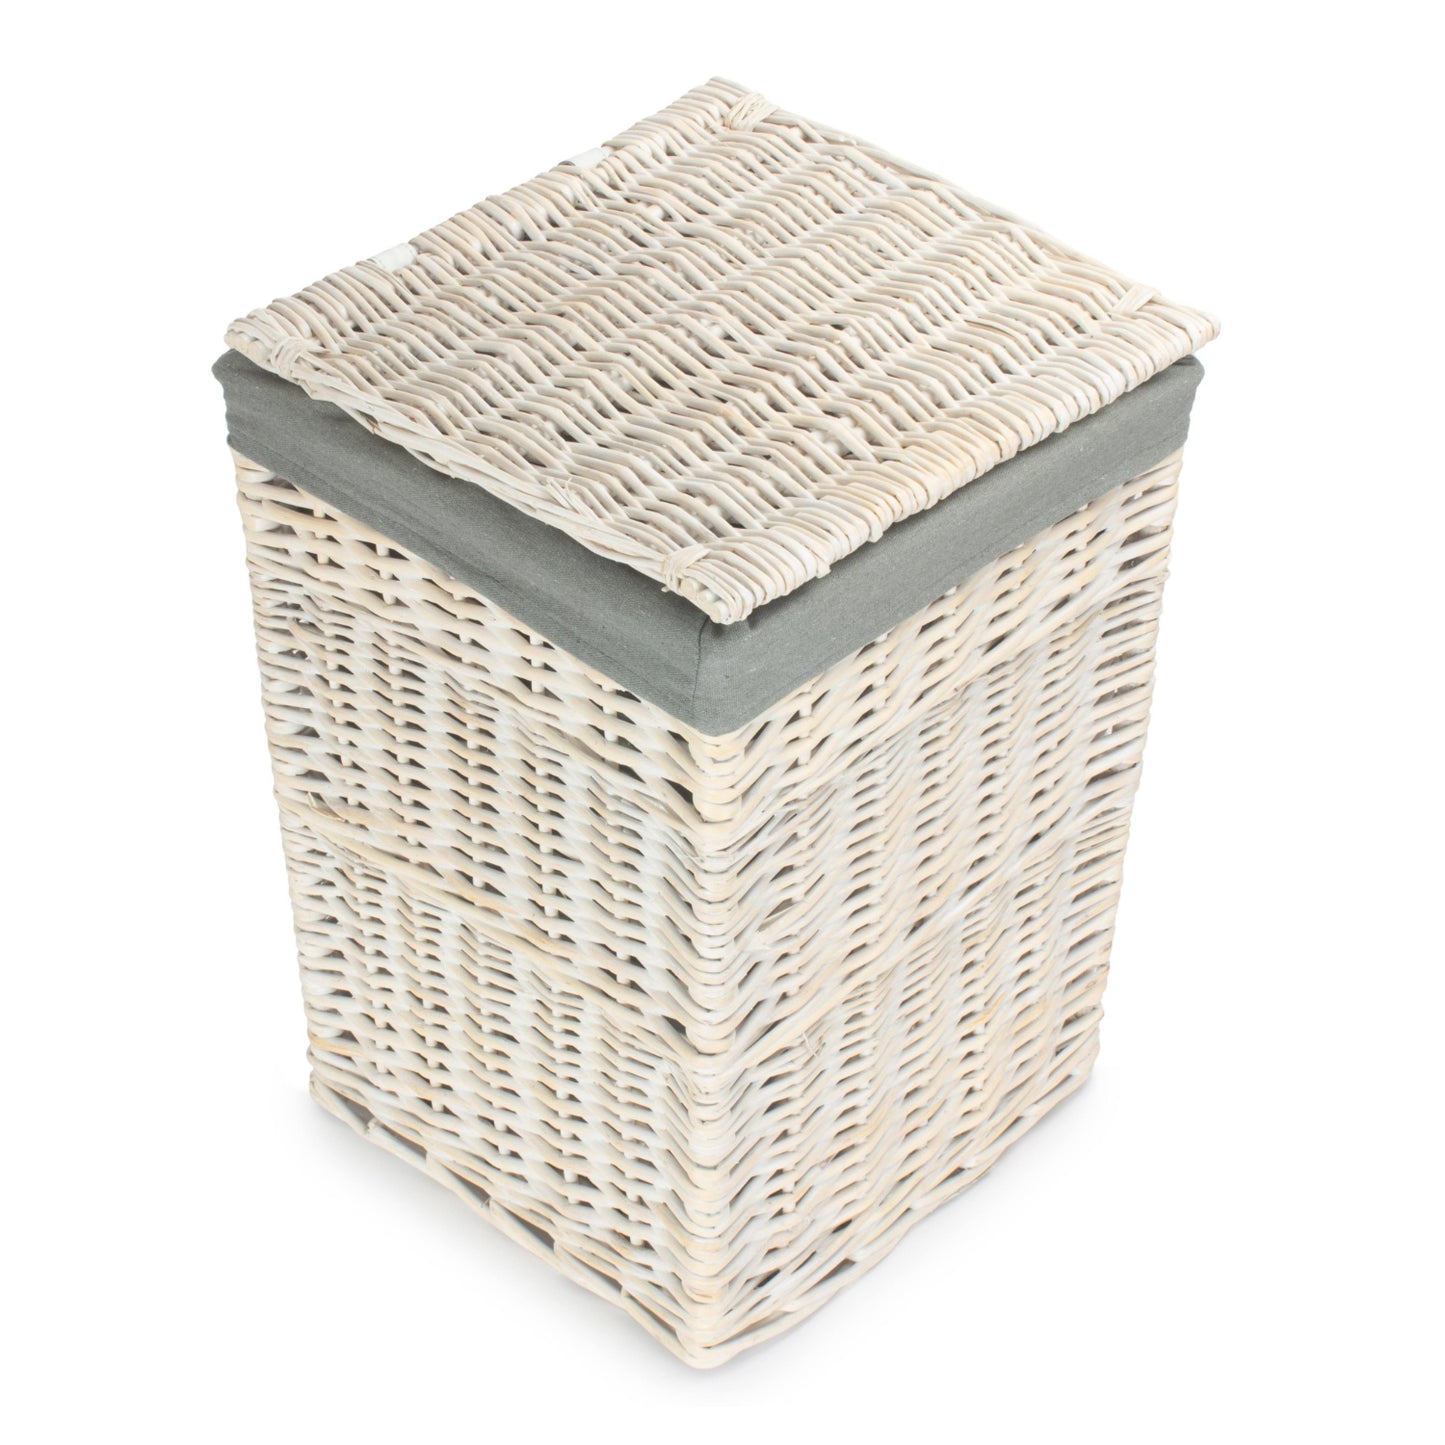 Small Square White Wash Laundry Hamper With Grey Sage Lining